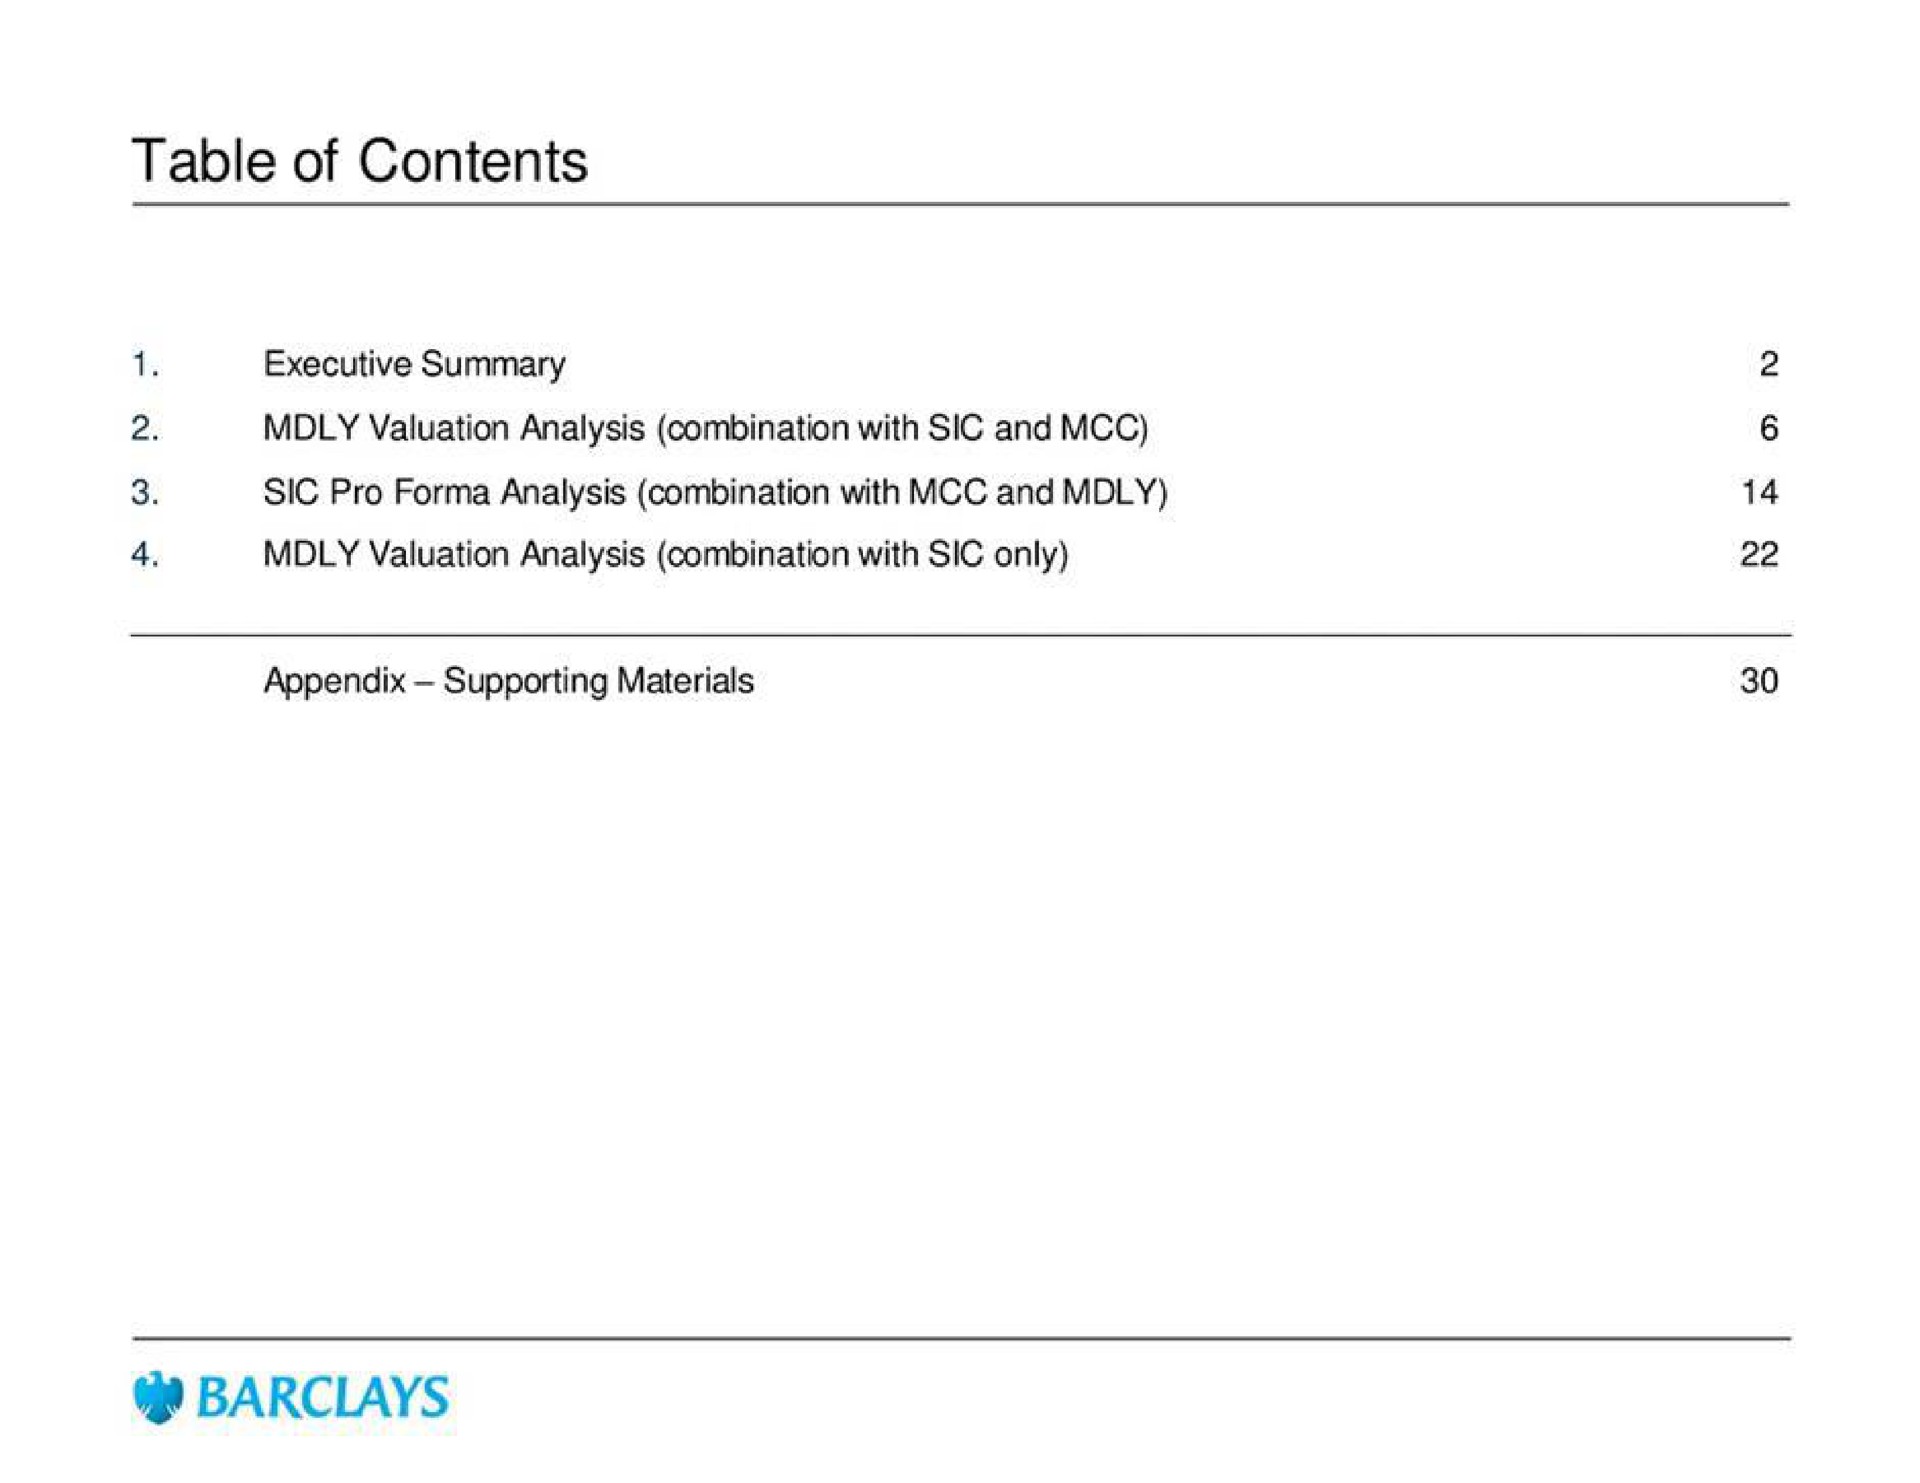 table of contents | Barclays